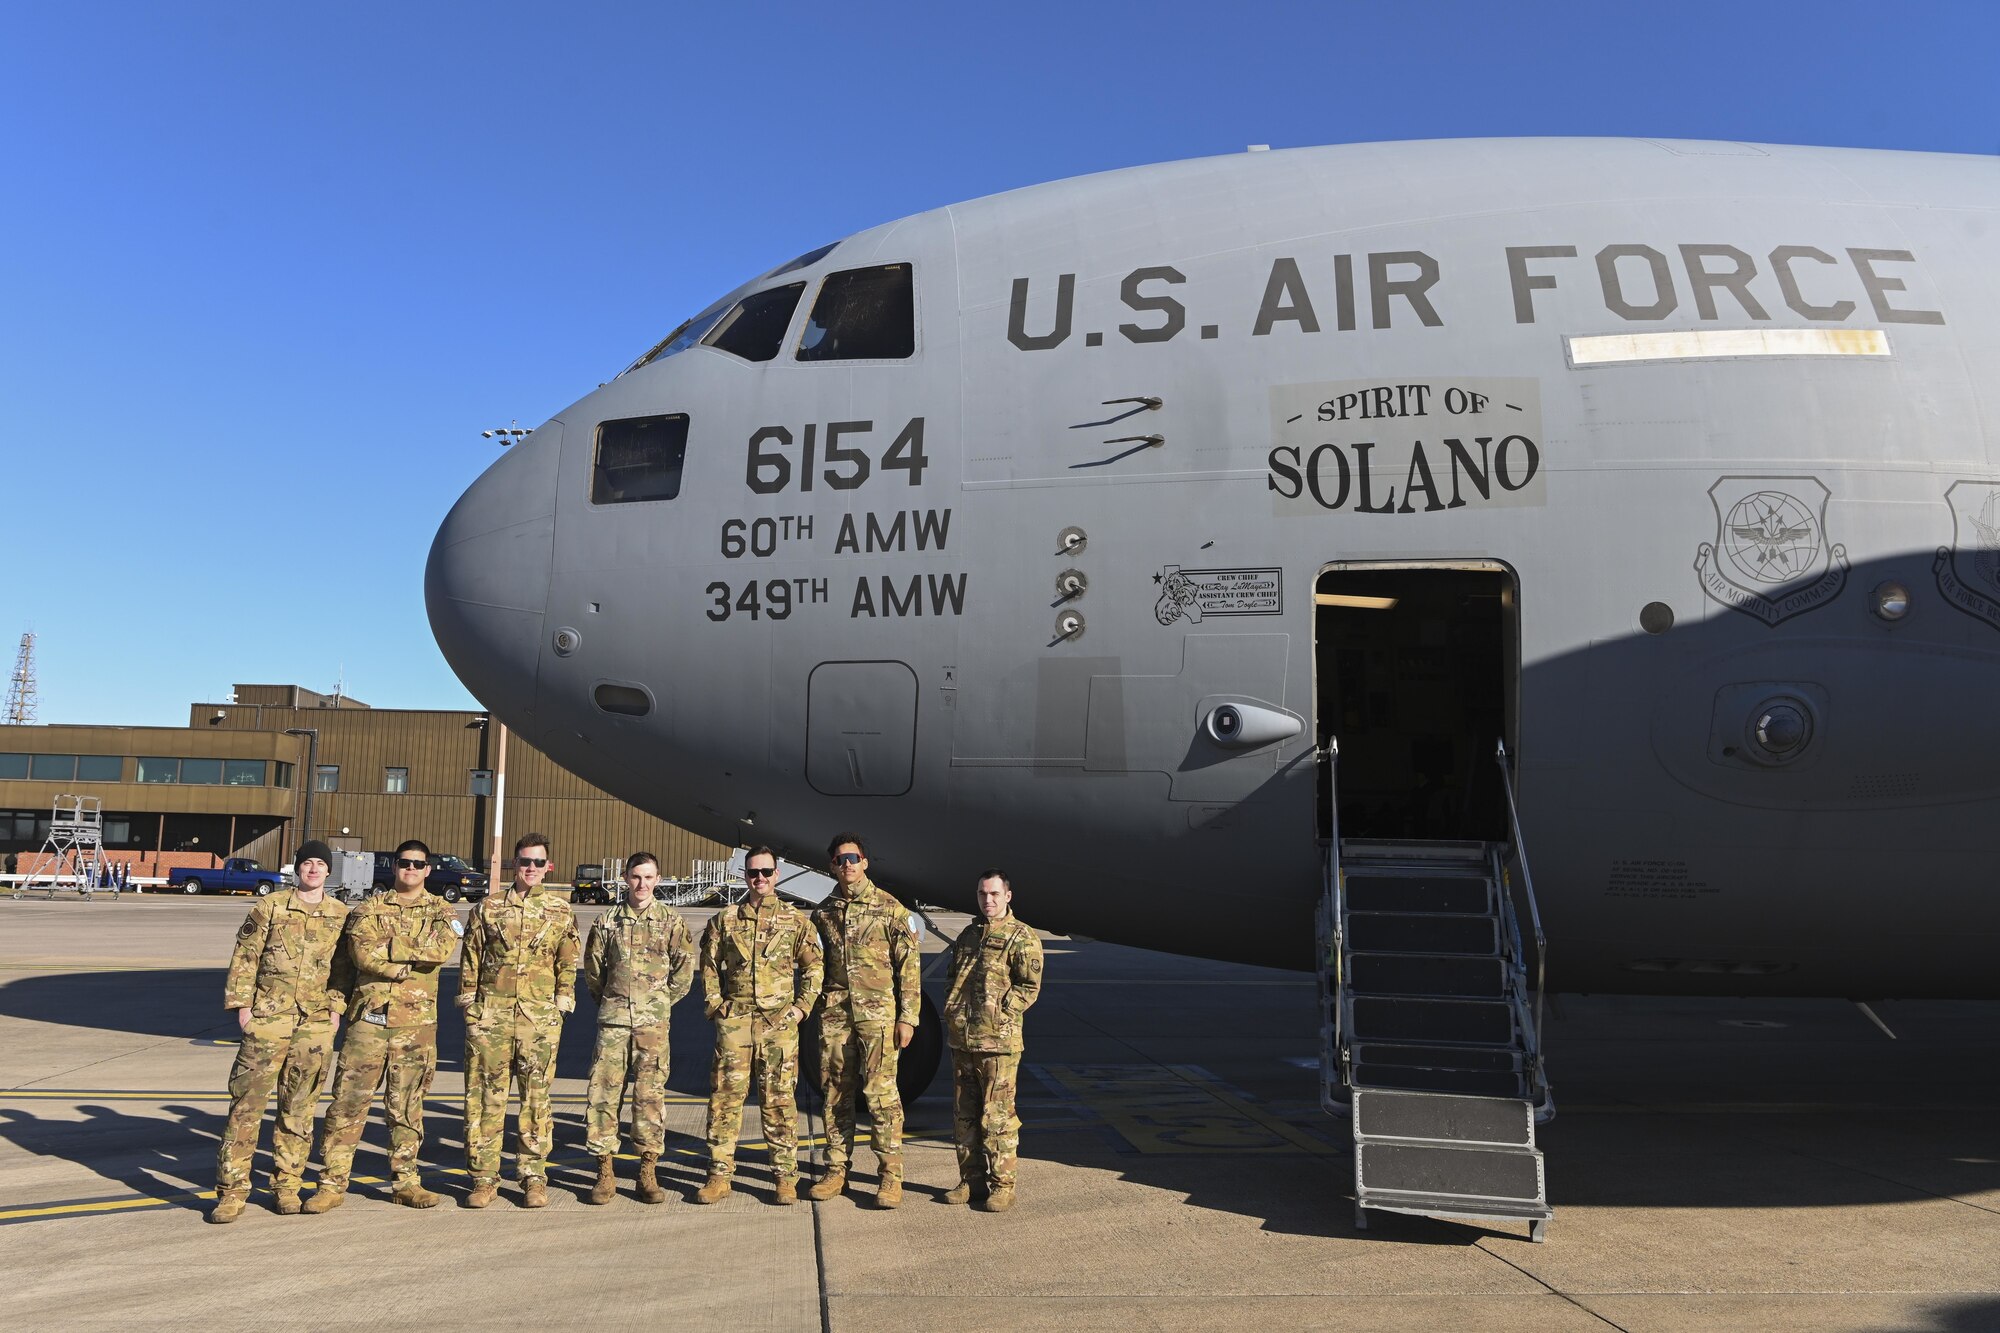 U.S. Airmen assigned to the 60th Air Mobility Wing, Travis Air Force Base, Calif., landed at Royal Air Force Mildenhall, England, in their C-17 Globemaster III aircraft after transporting cargo to an air base in Norway, Feb. 27, 2022. RAF Mildenhall serves as a gateway and rest stop for transient aircrews conducting missions around the globe. (U.S. Air Force photo by Senior Airman Joseph Barron)